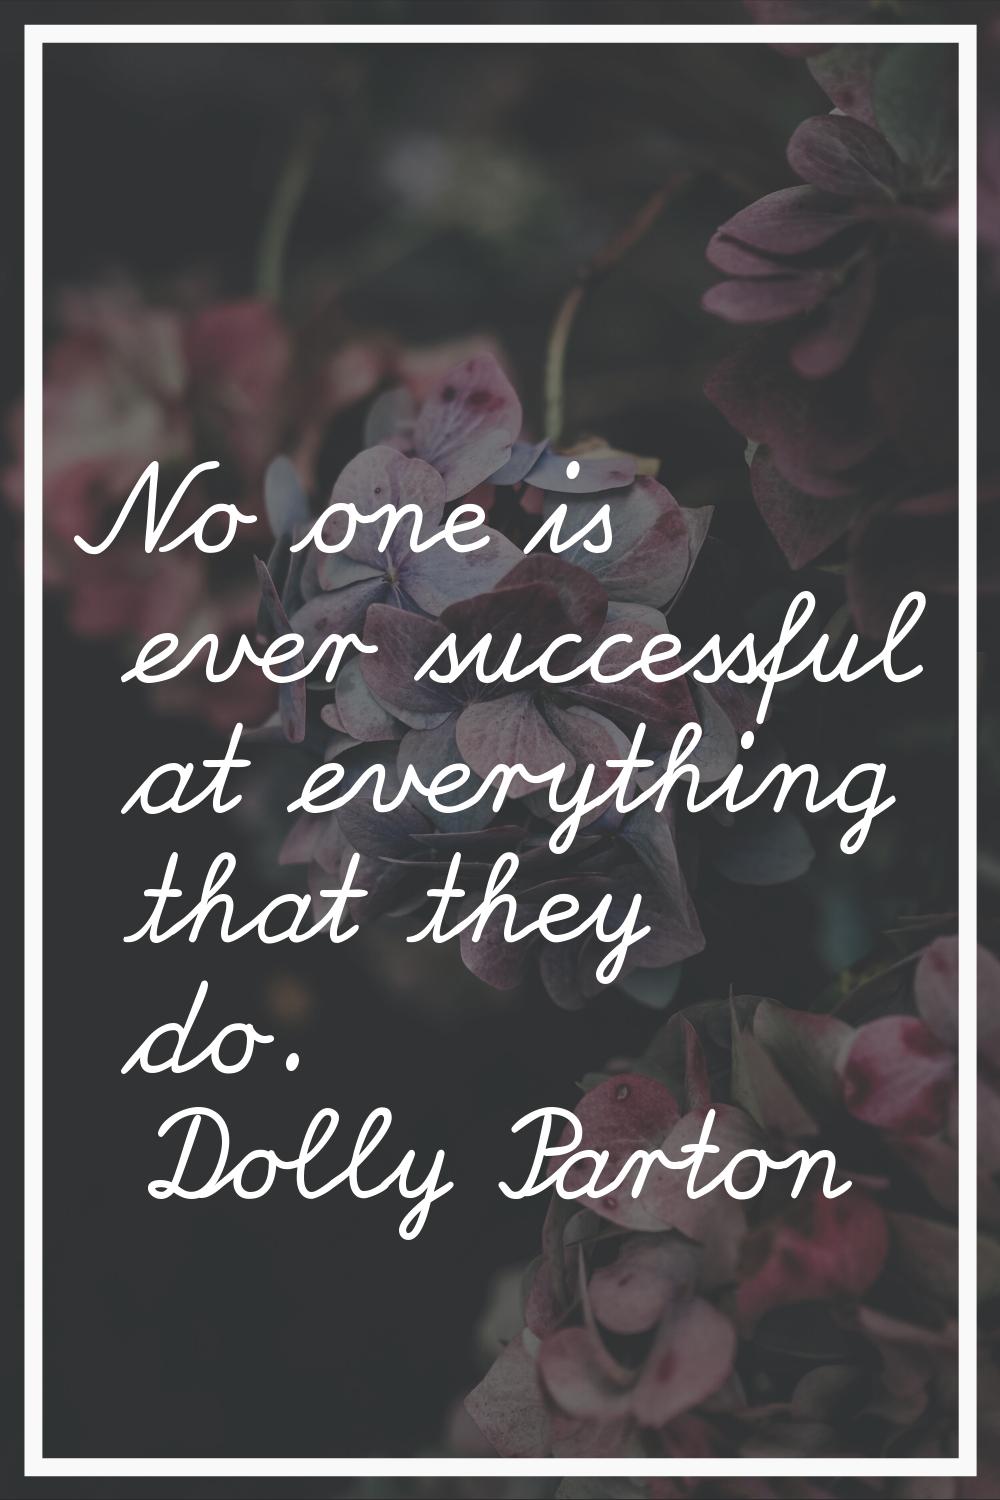 No one is ever successful at everything that they do.